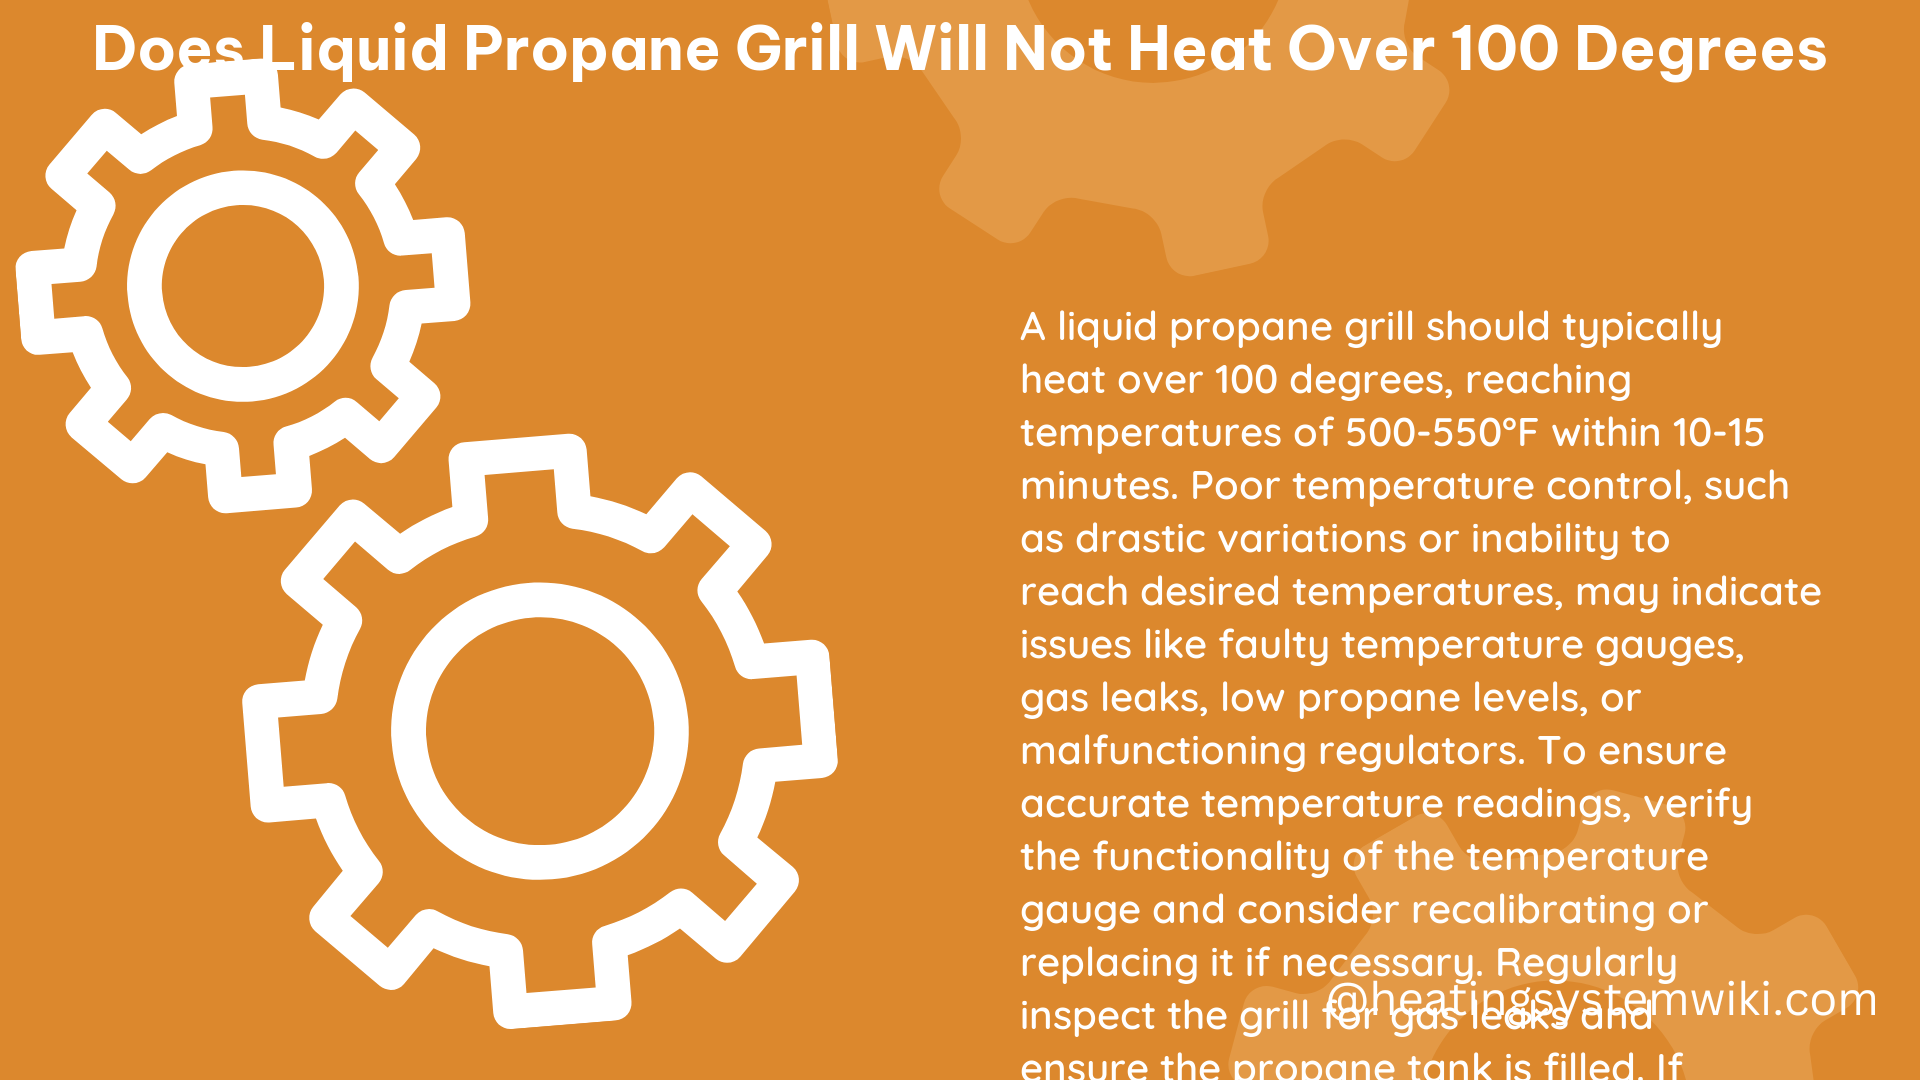 does liquid propane grill will not heat over 100 degrees